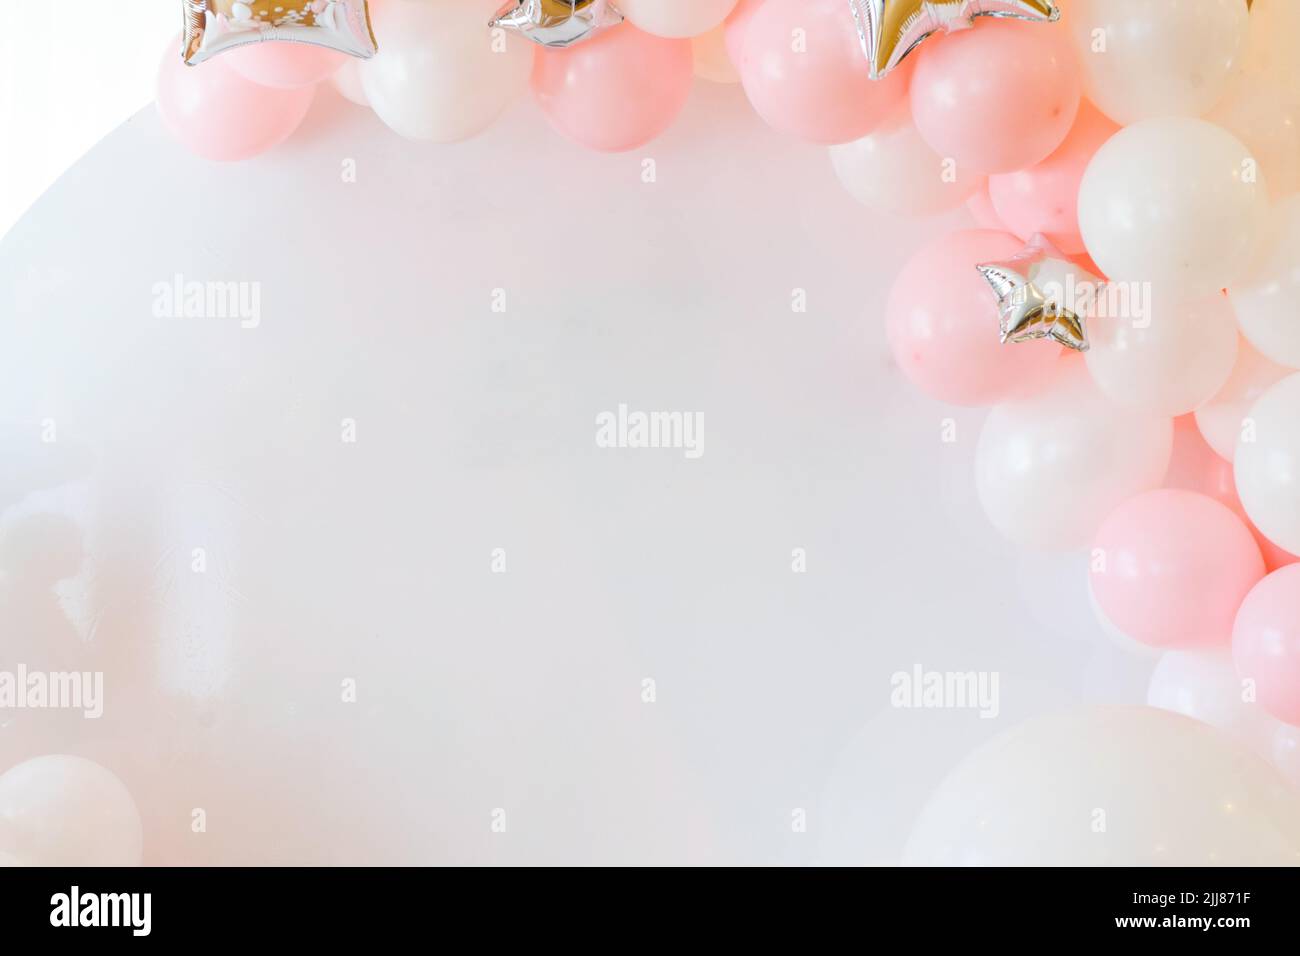 Birthday decorations with pastel balloons on white background Stock Photo -  Alamy